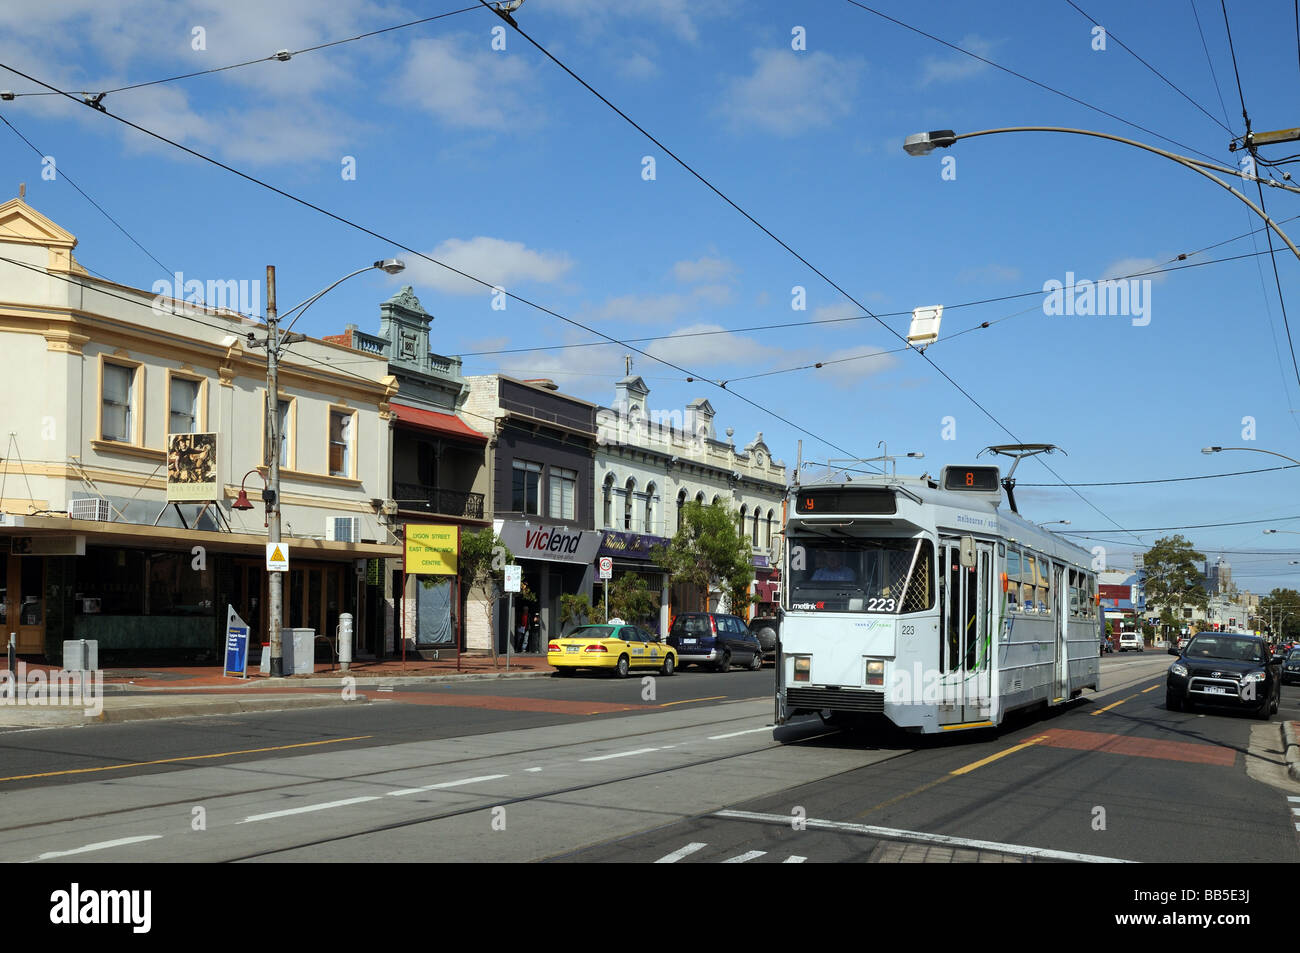 Typical suburban shops some with Victorian facades Lygon Street Carlton with tram lines Melbourne Australia Stock Photo